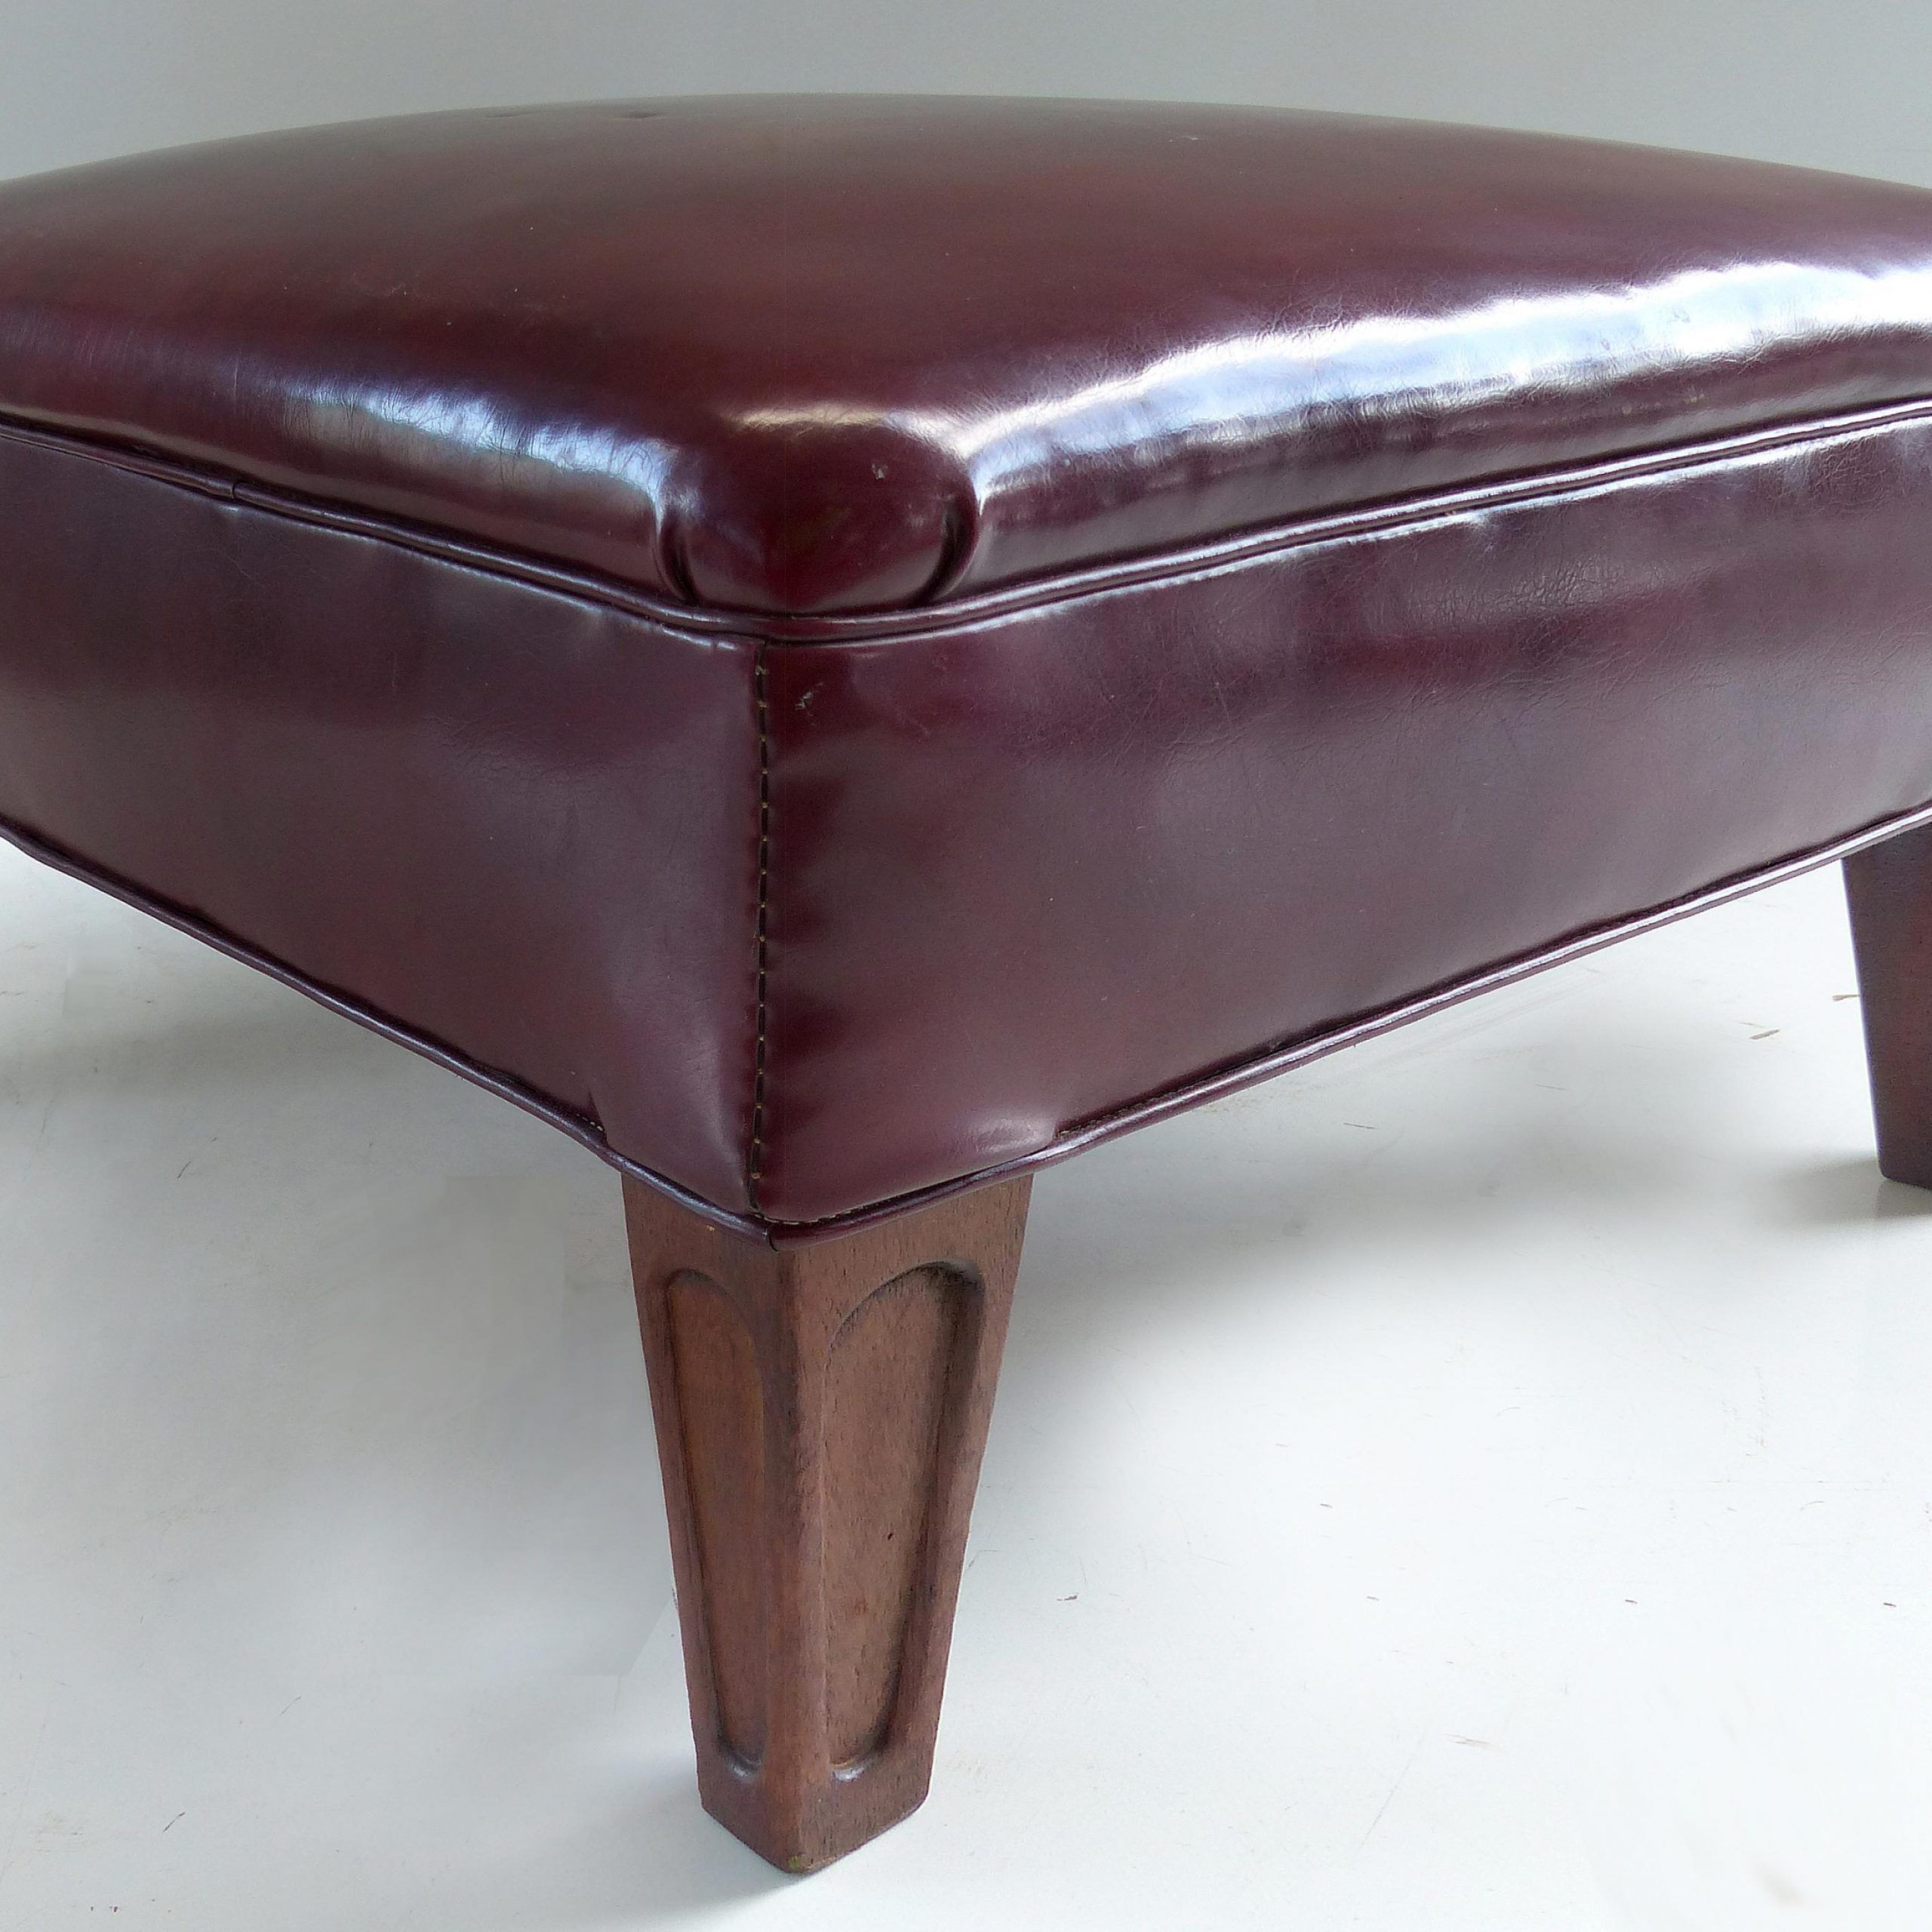 [%maroon Leather Ottoman Sale, Save 55%. Throughout Best And Newest Burgundy Ottomans|burgundy Ottomans In Preferred Maroon Leather Ottoman Sale, Save 55%.|favorite Burgundy Ottomans Within Maroon Leather Ottoman Sale, Save 55%.|2019 Maroon Leather Ottoman Sale, Save 55% (View 14 of 15)